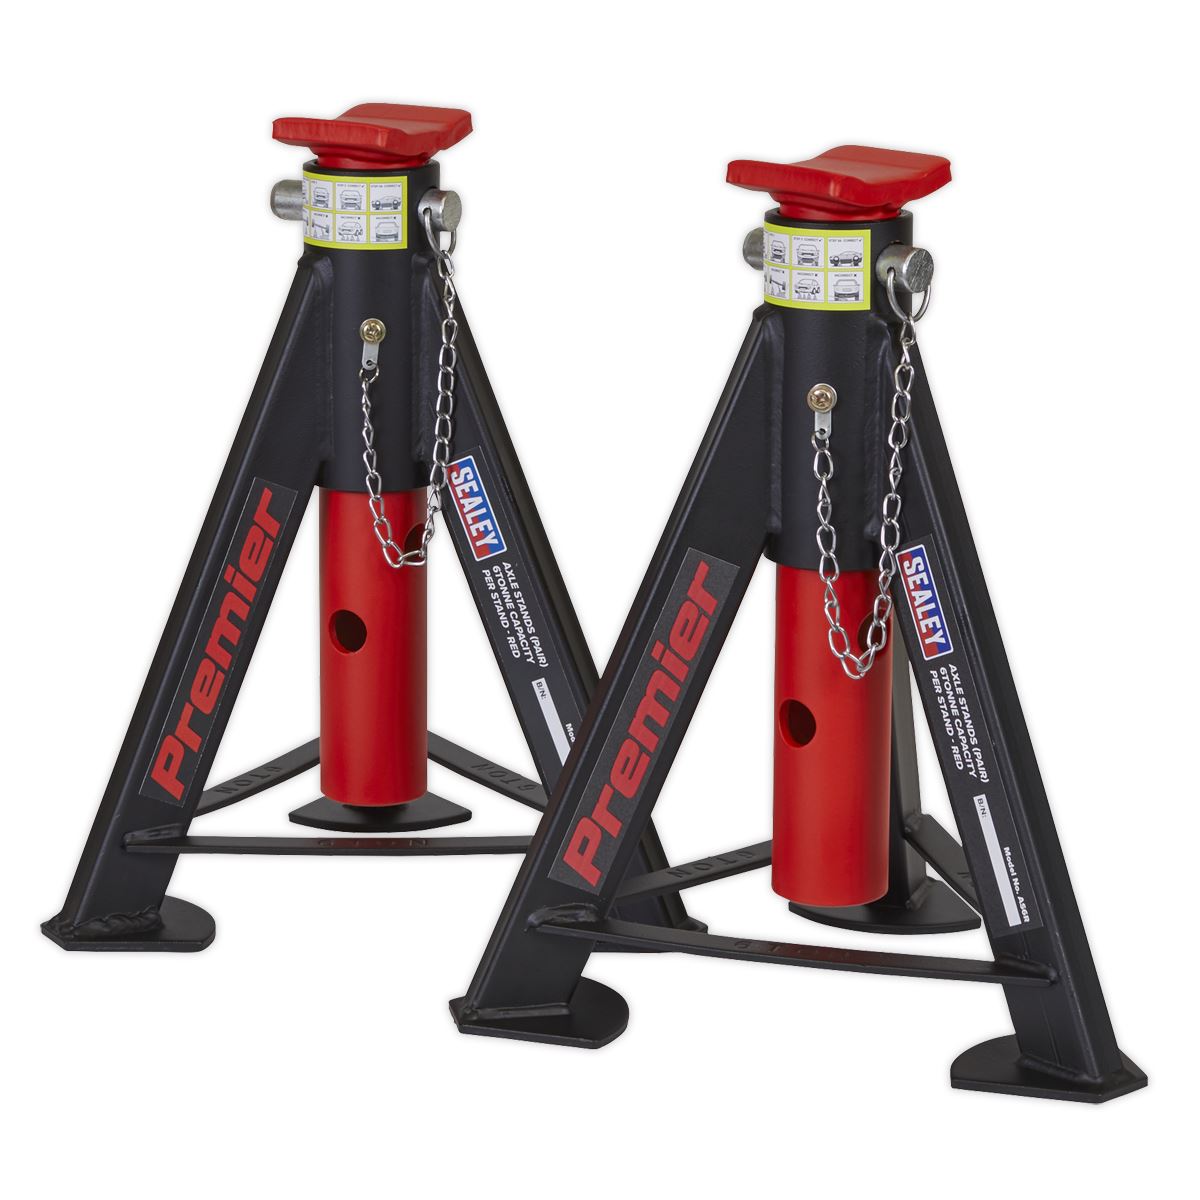 Sealey Premier Premier Axle Stands (Pair) 6 Tonne Capacity per Stand - Red